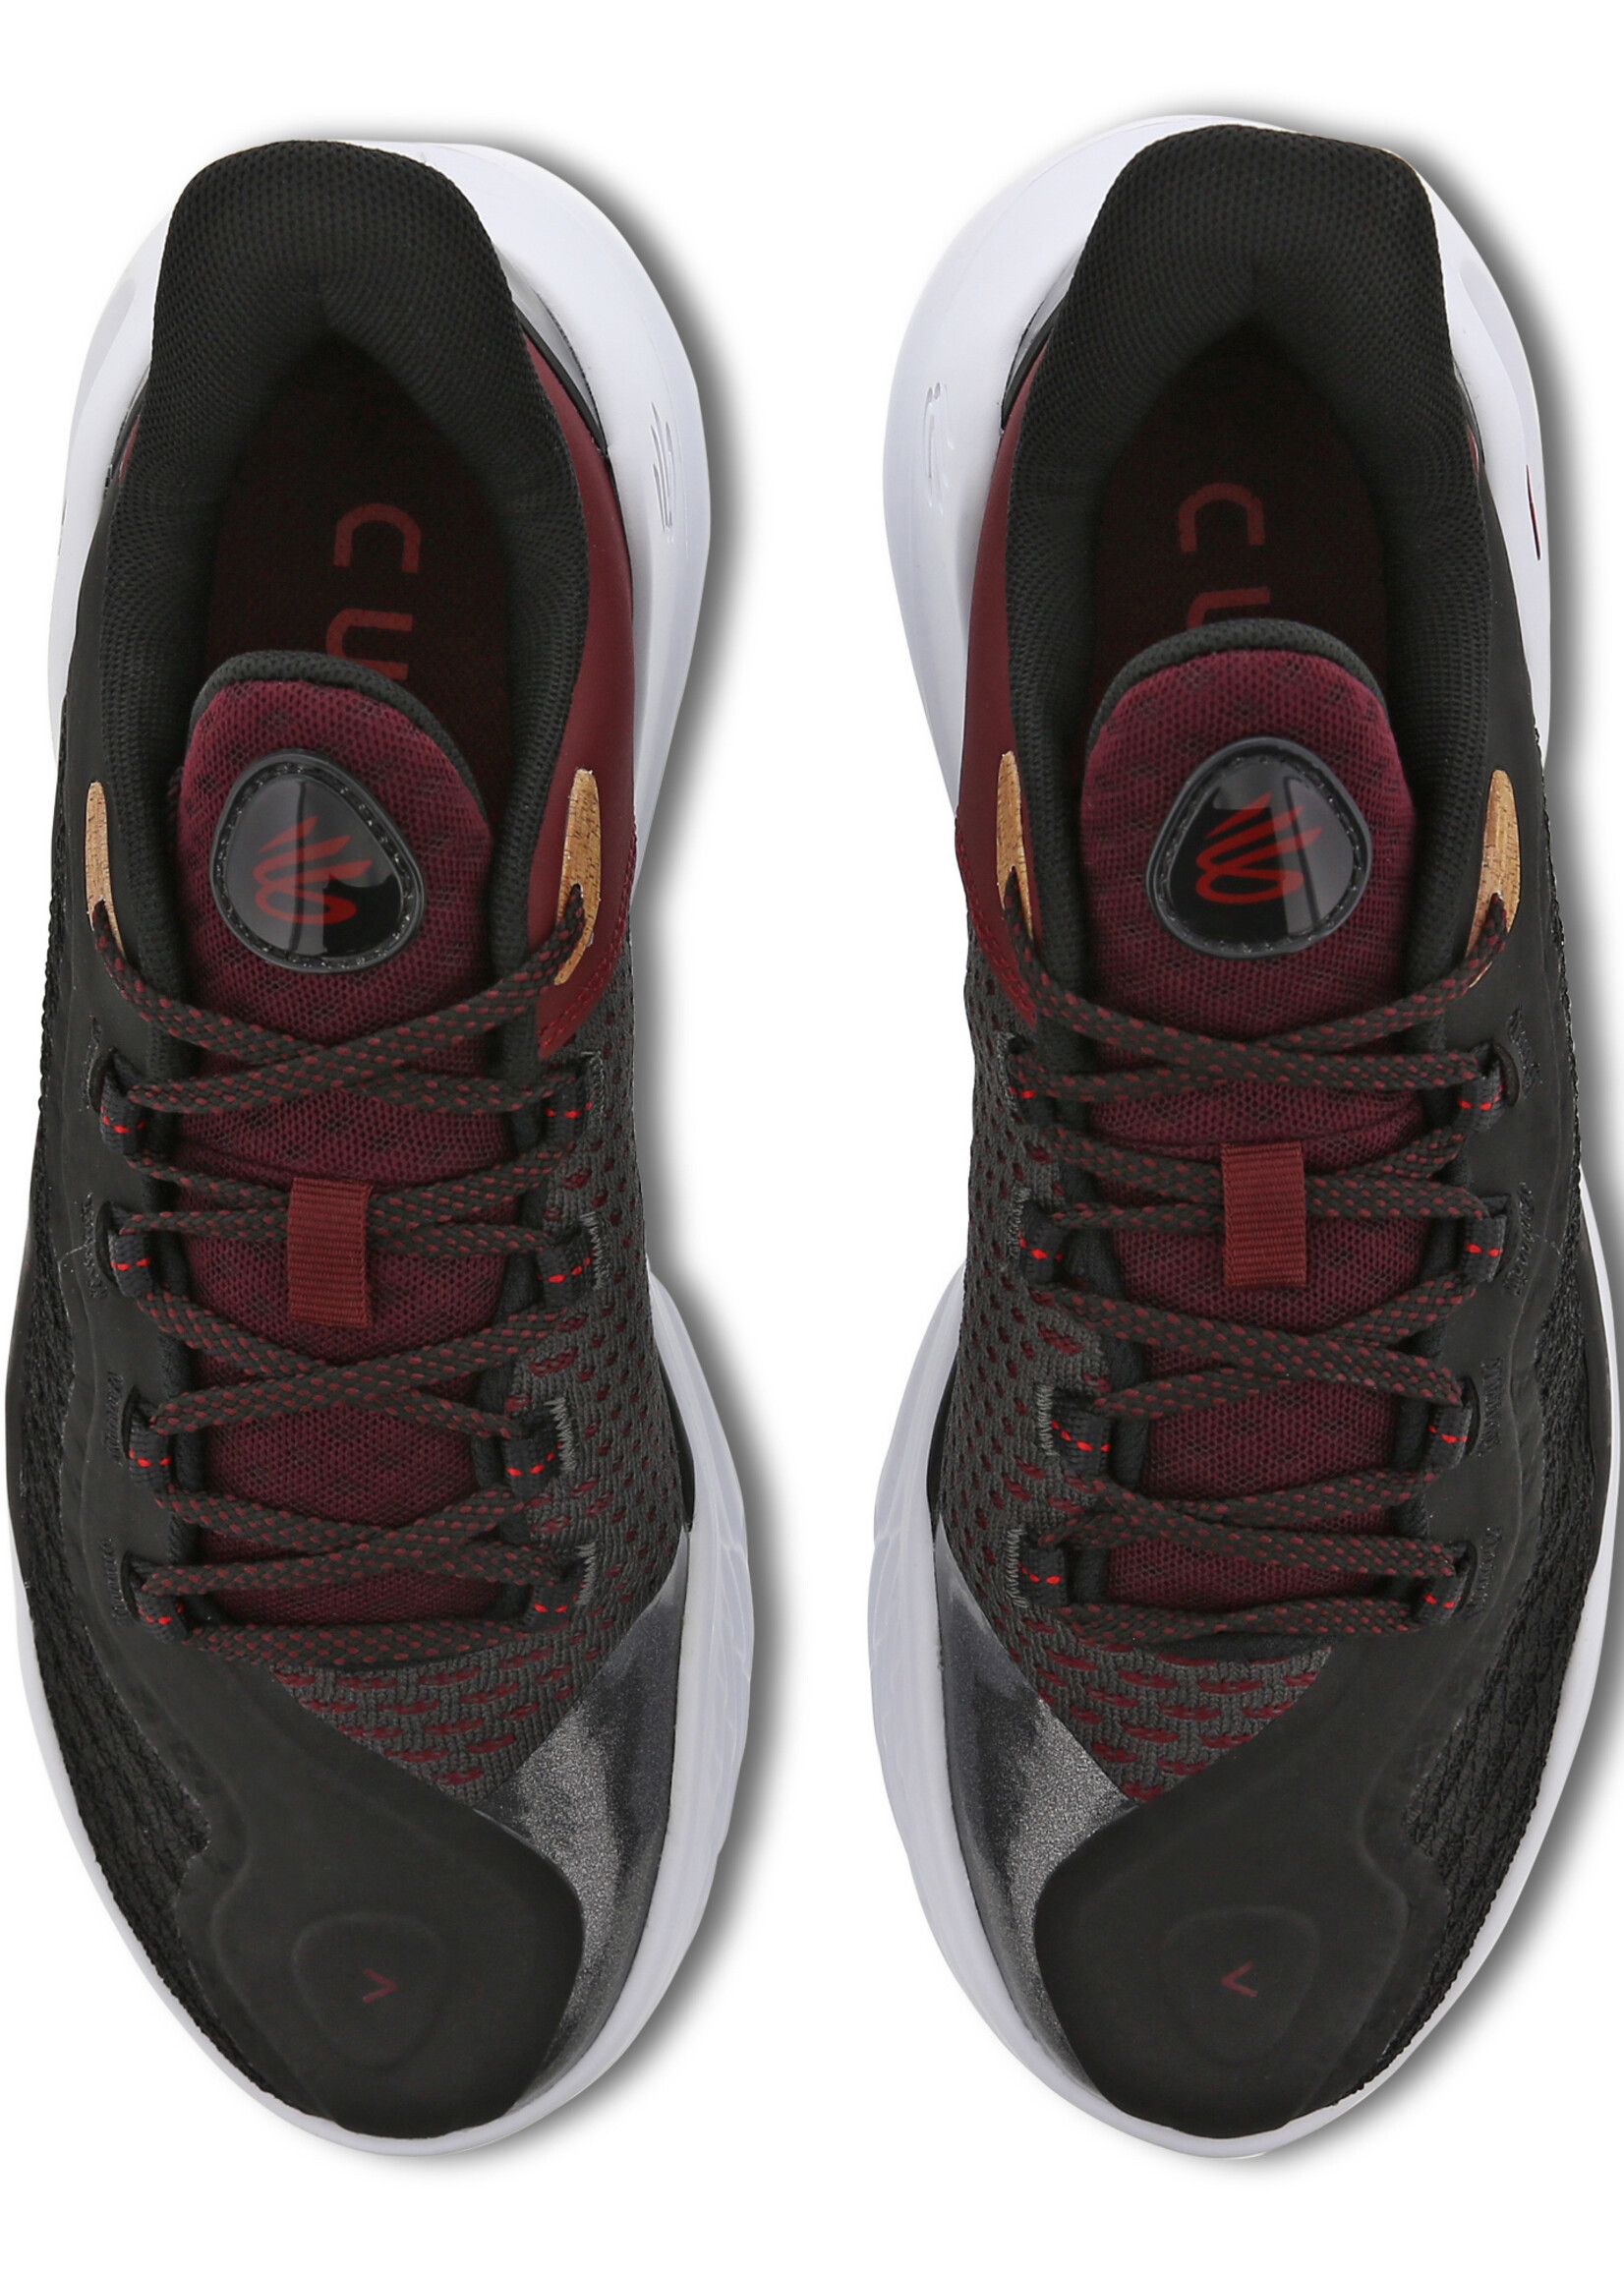 Under Armour Curry 11 Domaine Curry